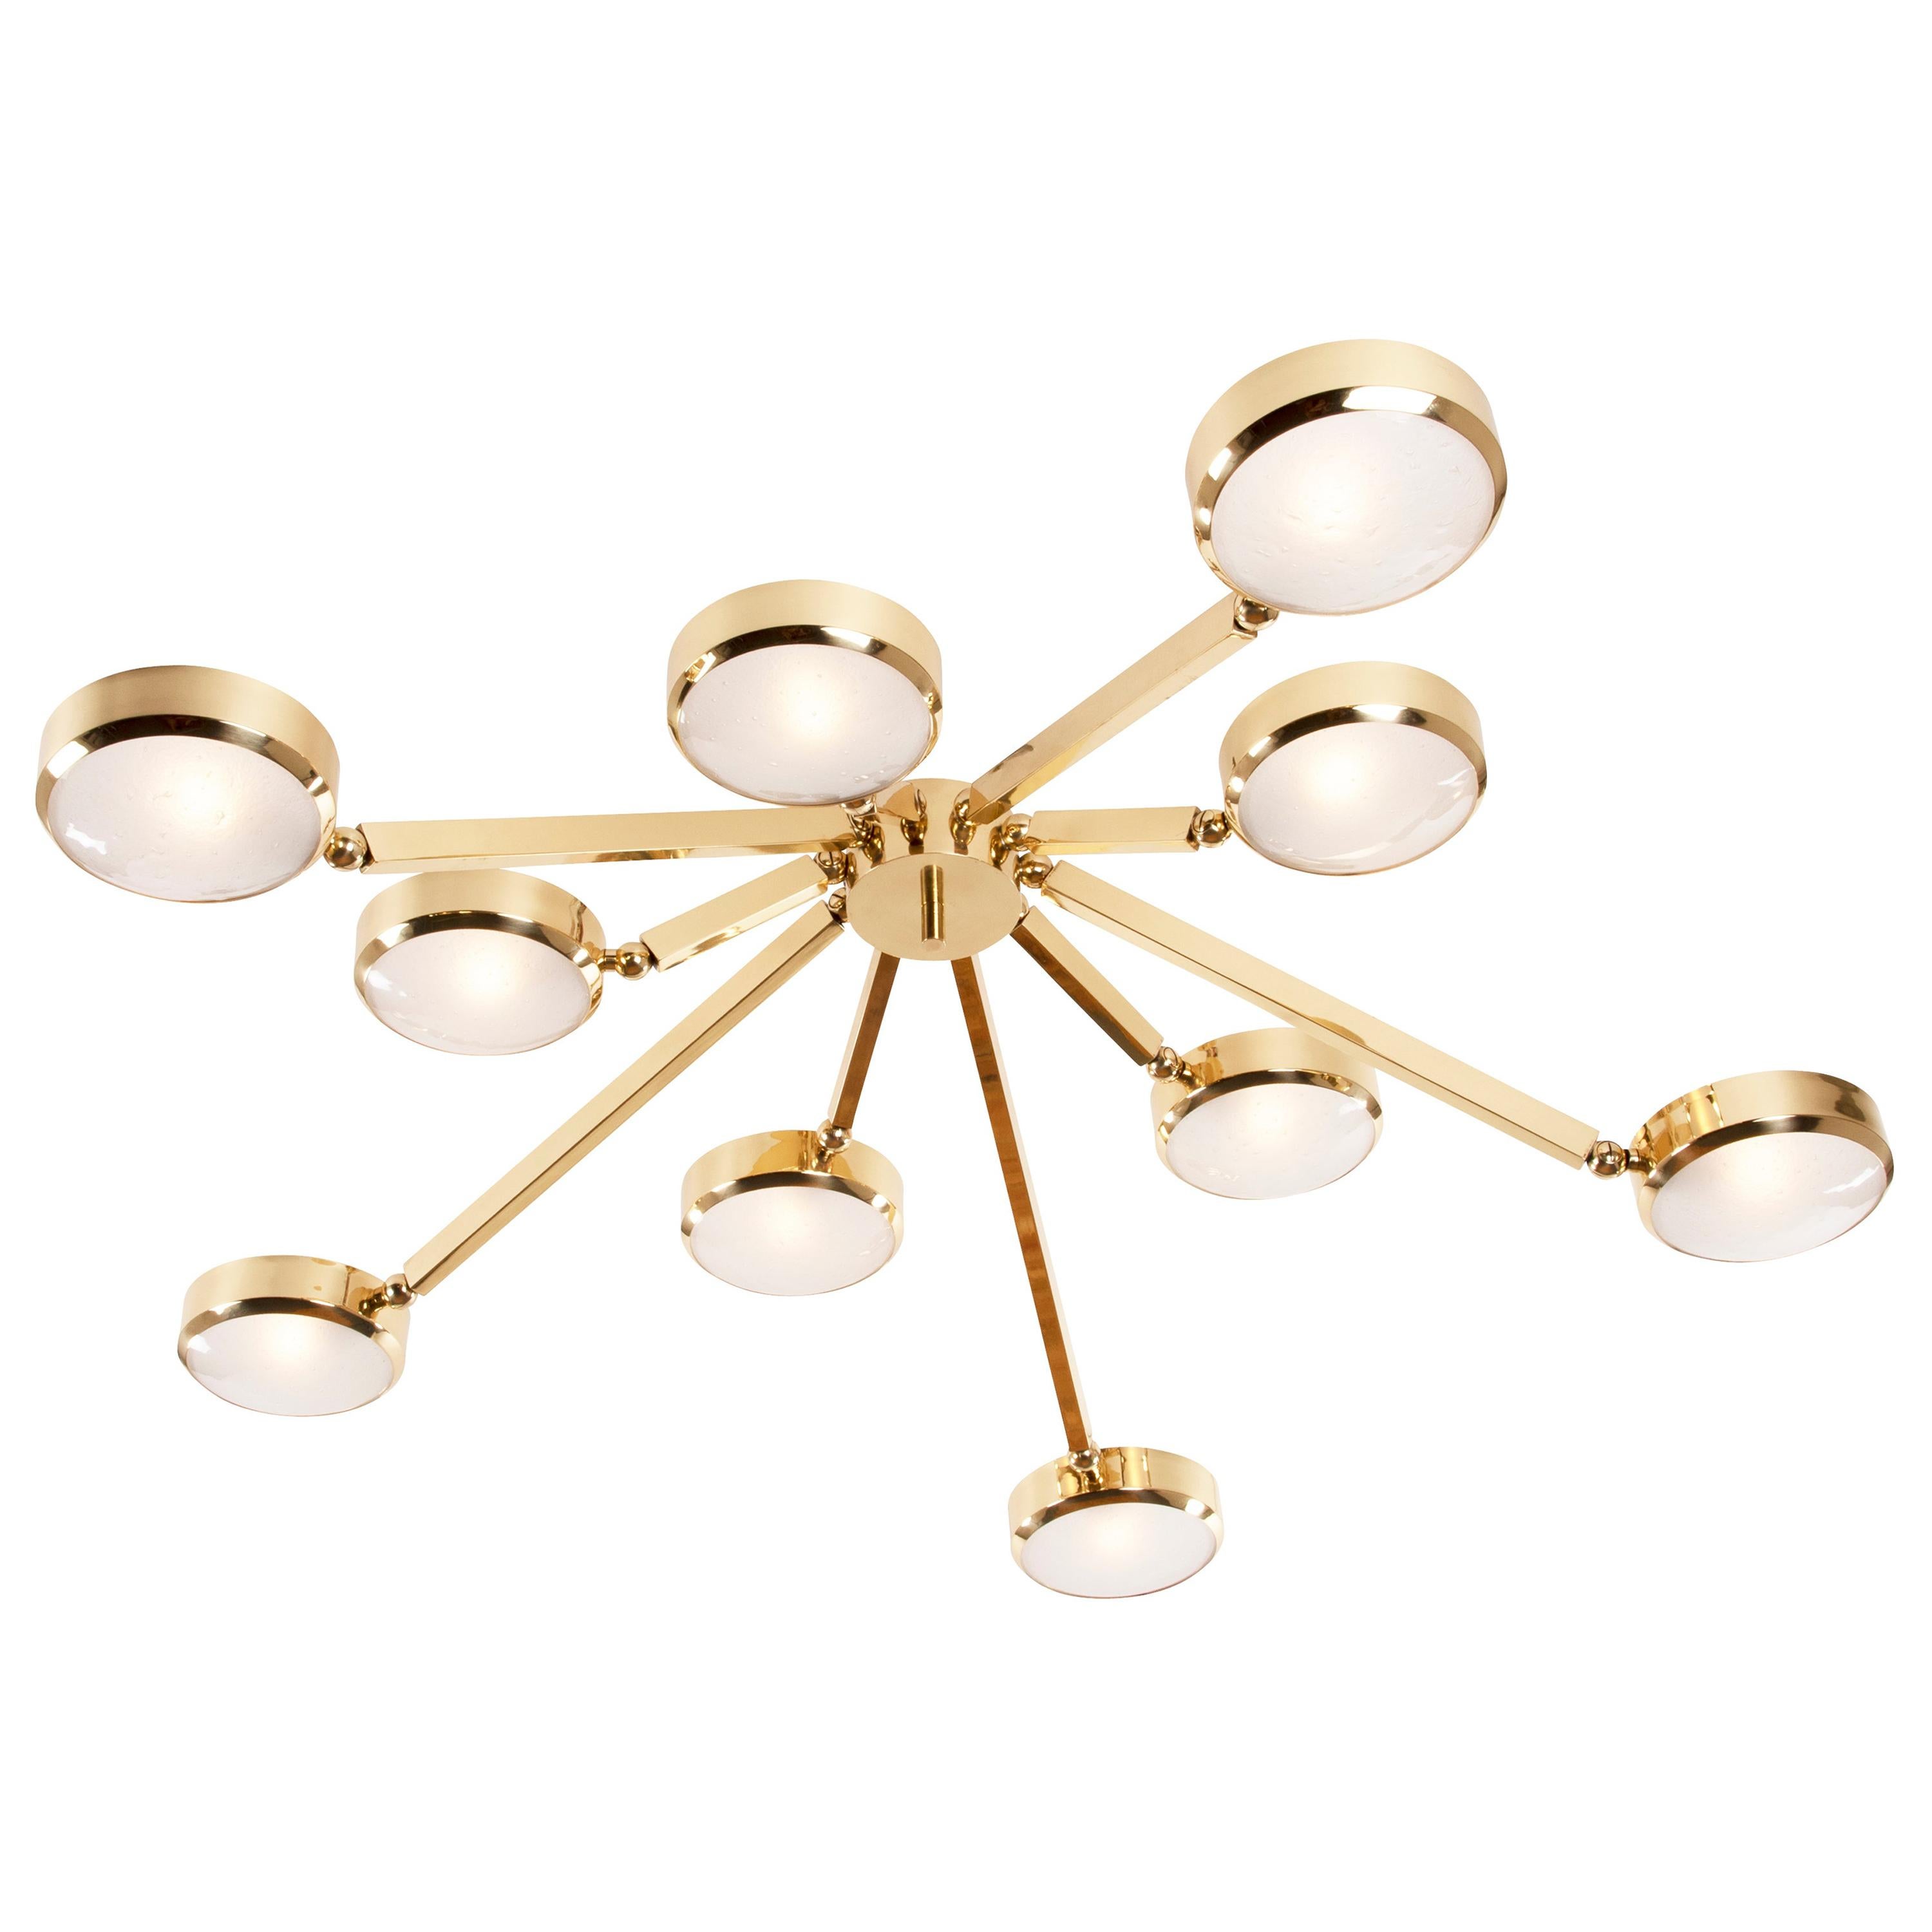 Italian Oculus Ceiling Light by Gaspare Asaro-Murano Glass and Bronze Finish For Sale